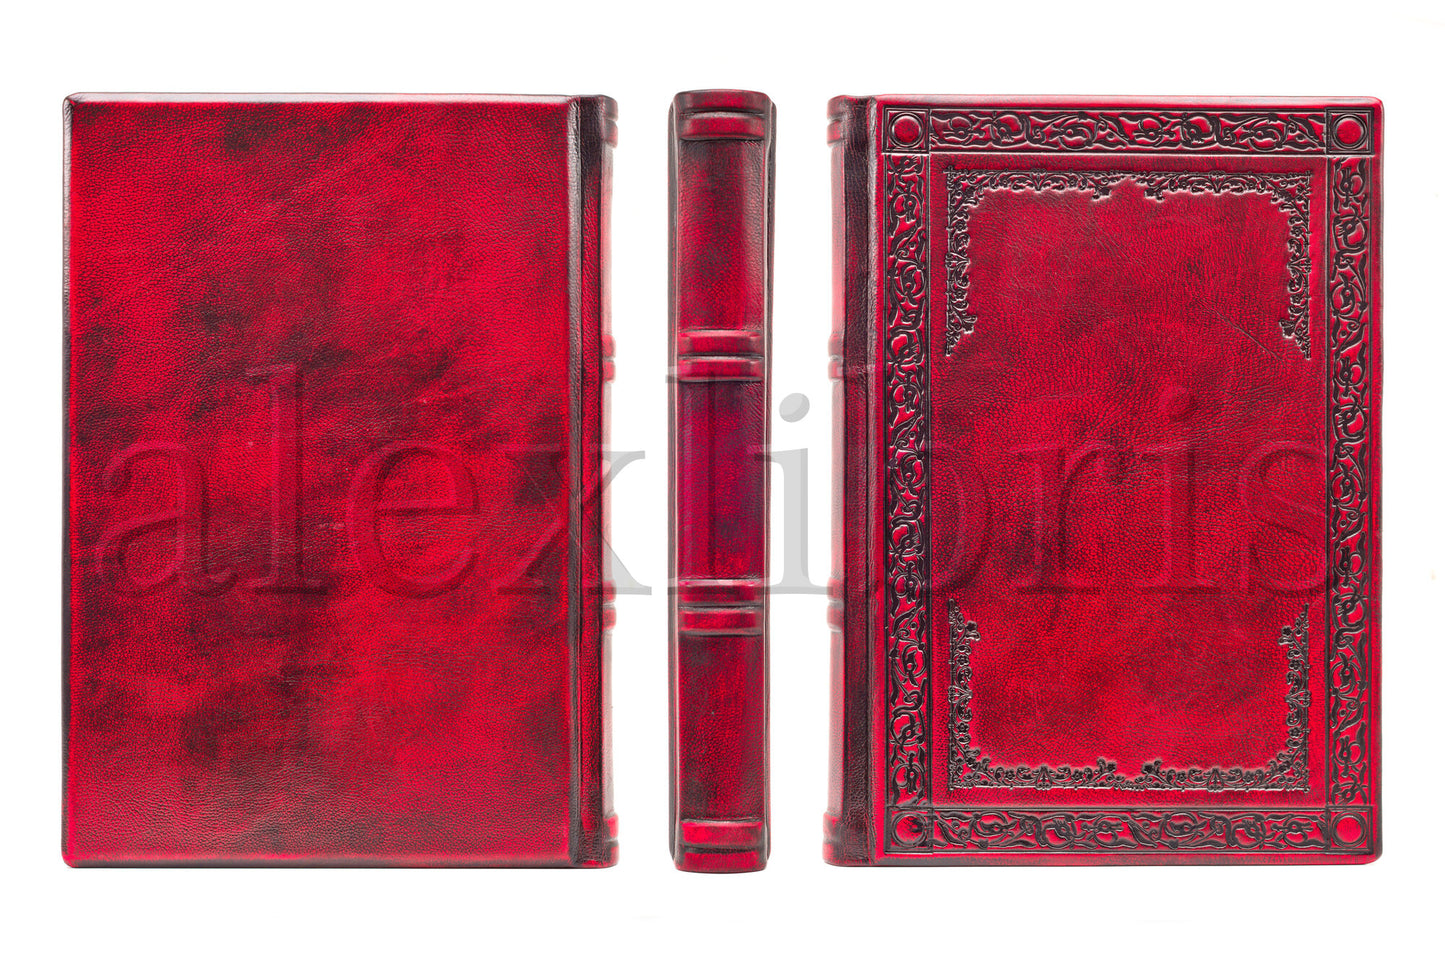 Elegant Leather Agenda: Large 8 x 10 Inches, 260 Blank Pages - Organize Your Days with Style and Elegance in this Antiqued Leather Journal